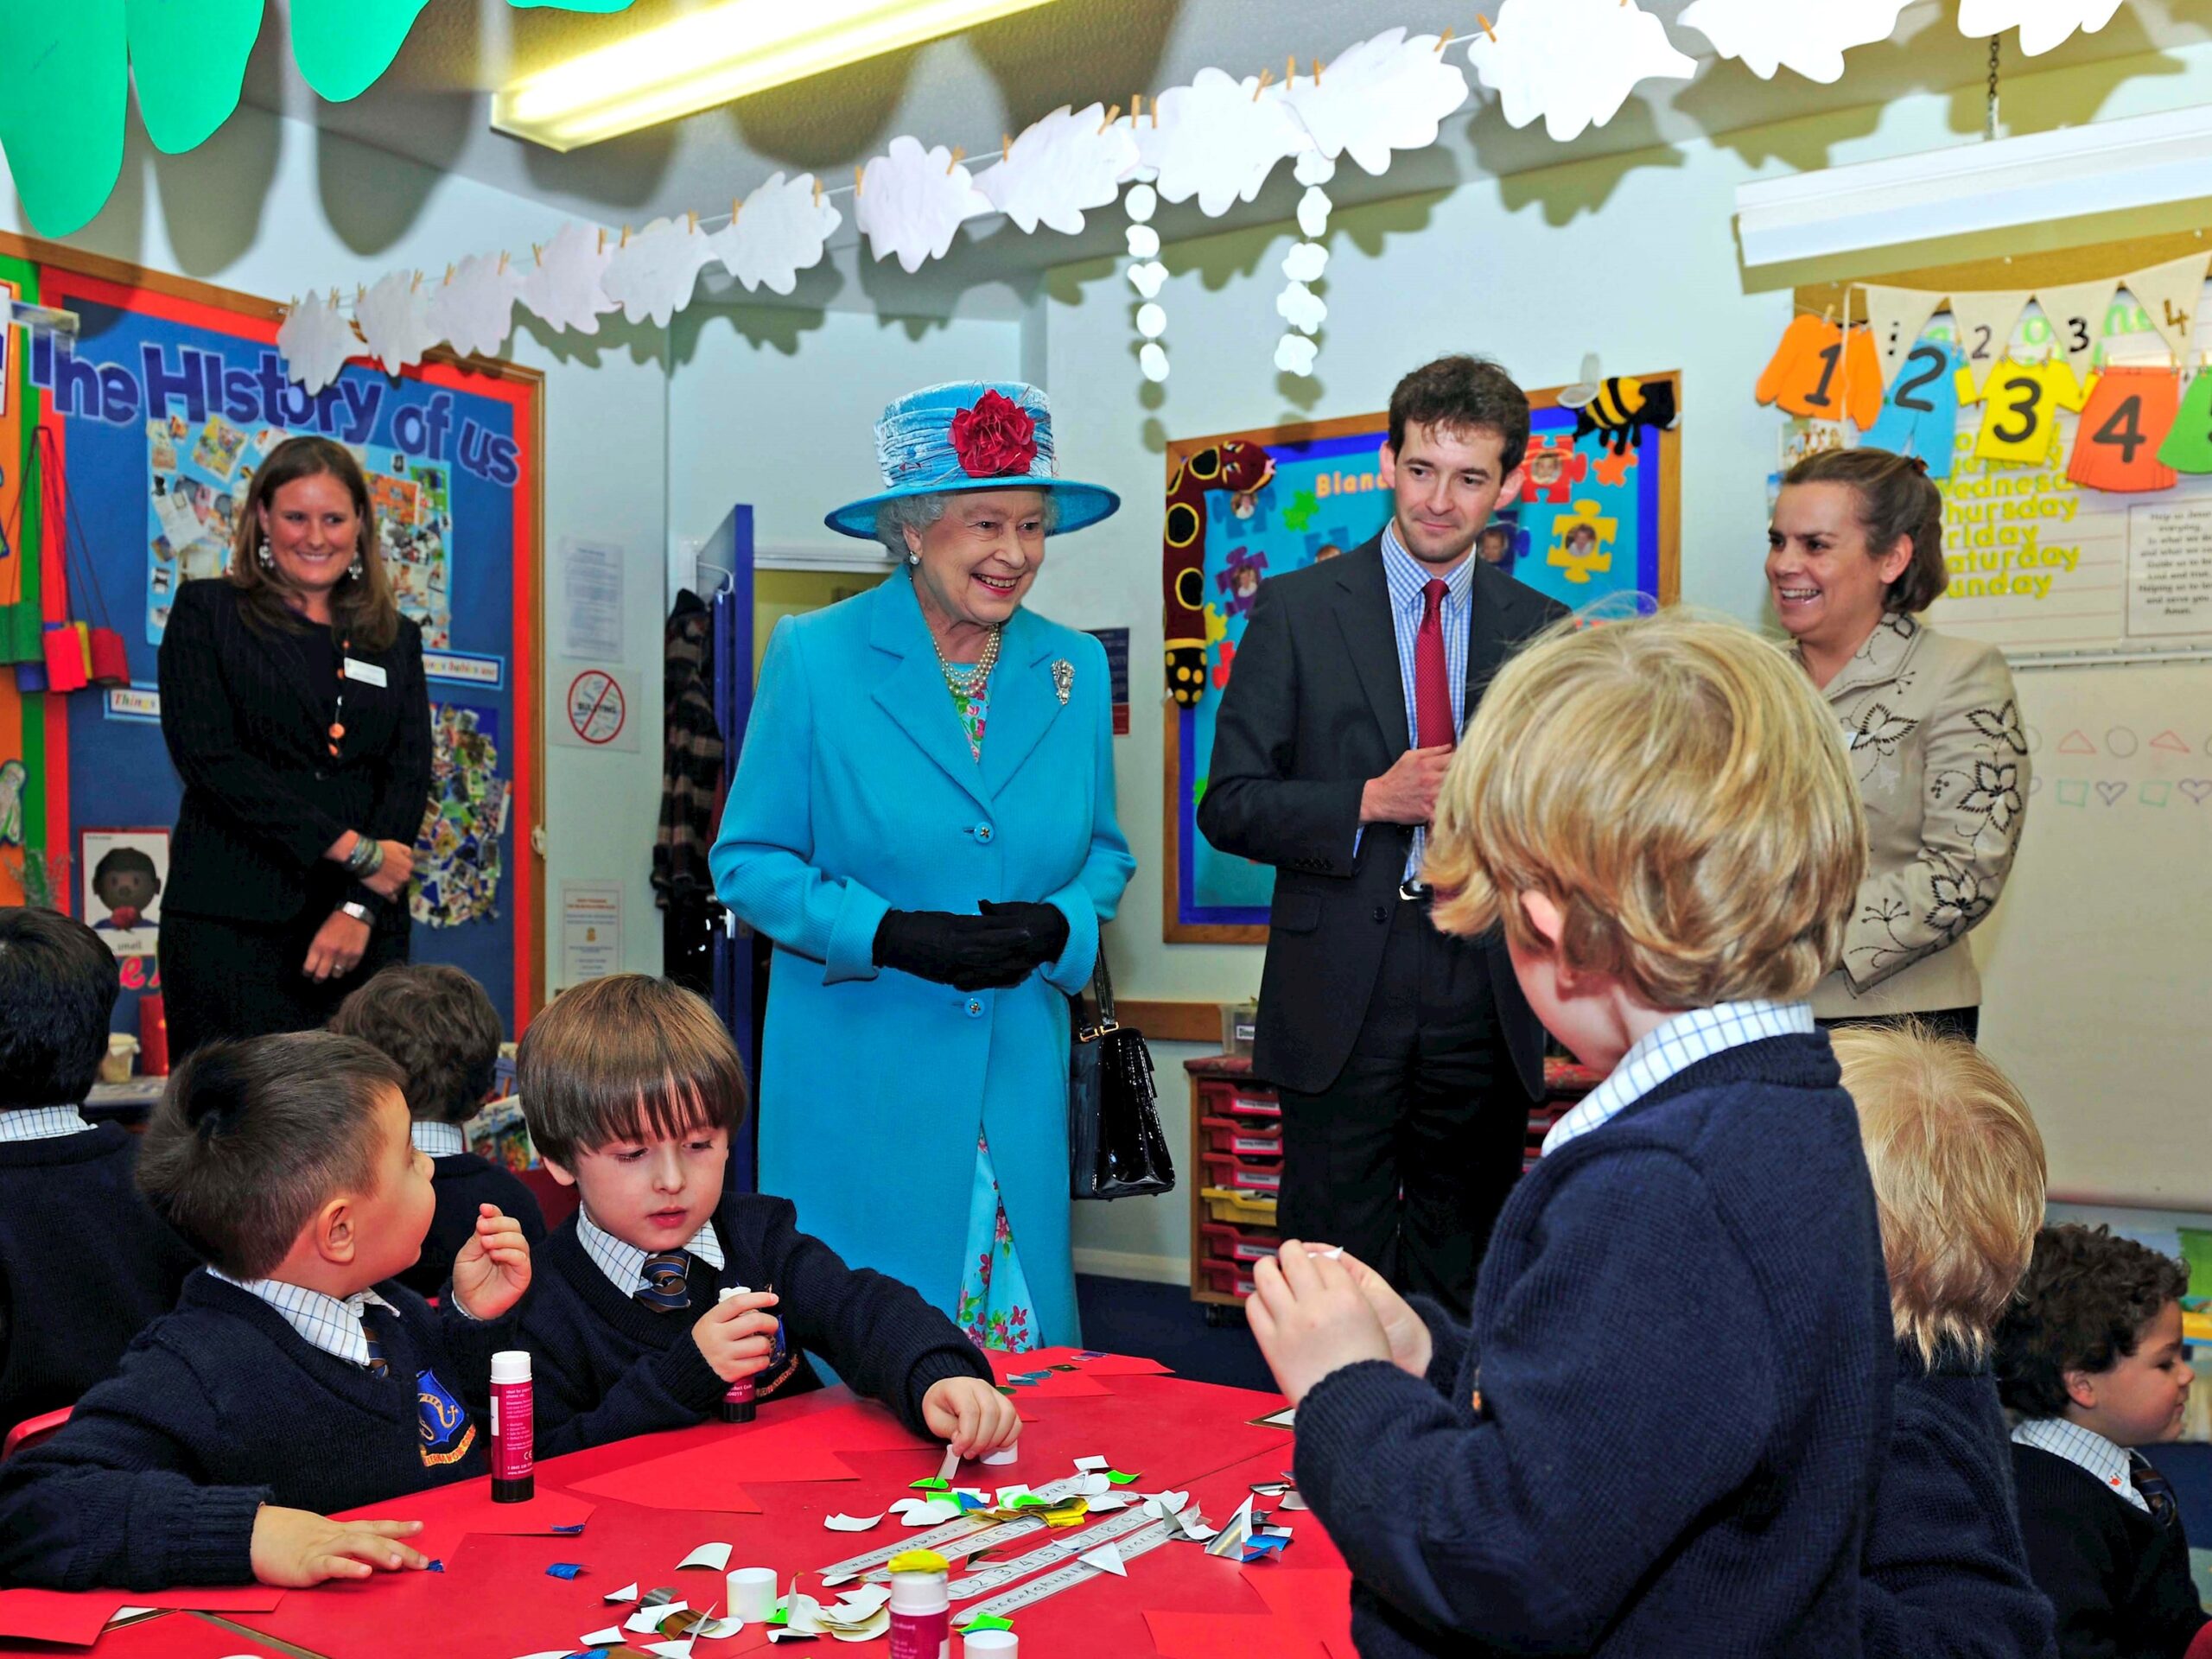 Her Majesty the Queen visiting St John's Beaumont School Pre-Prep in 2009